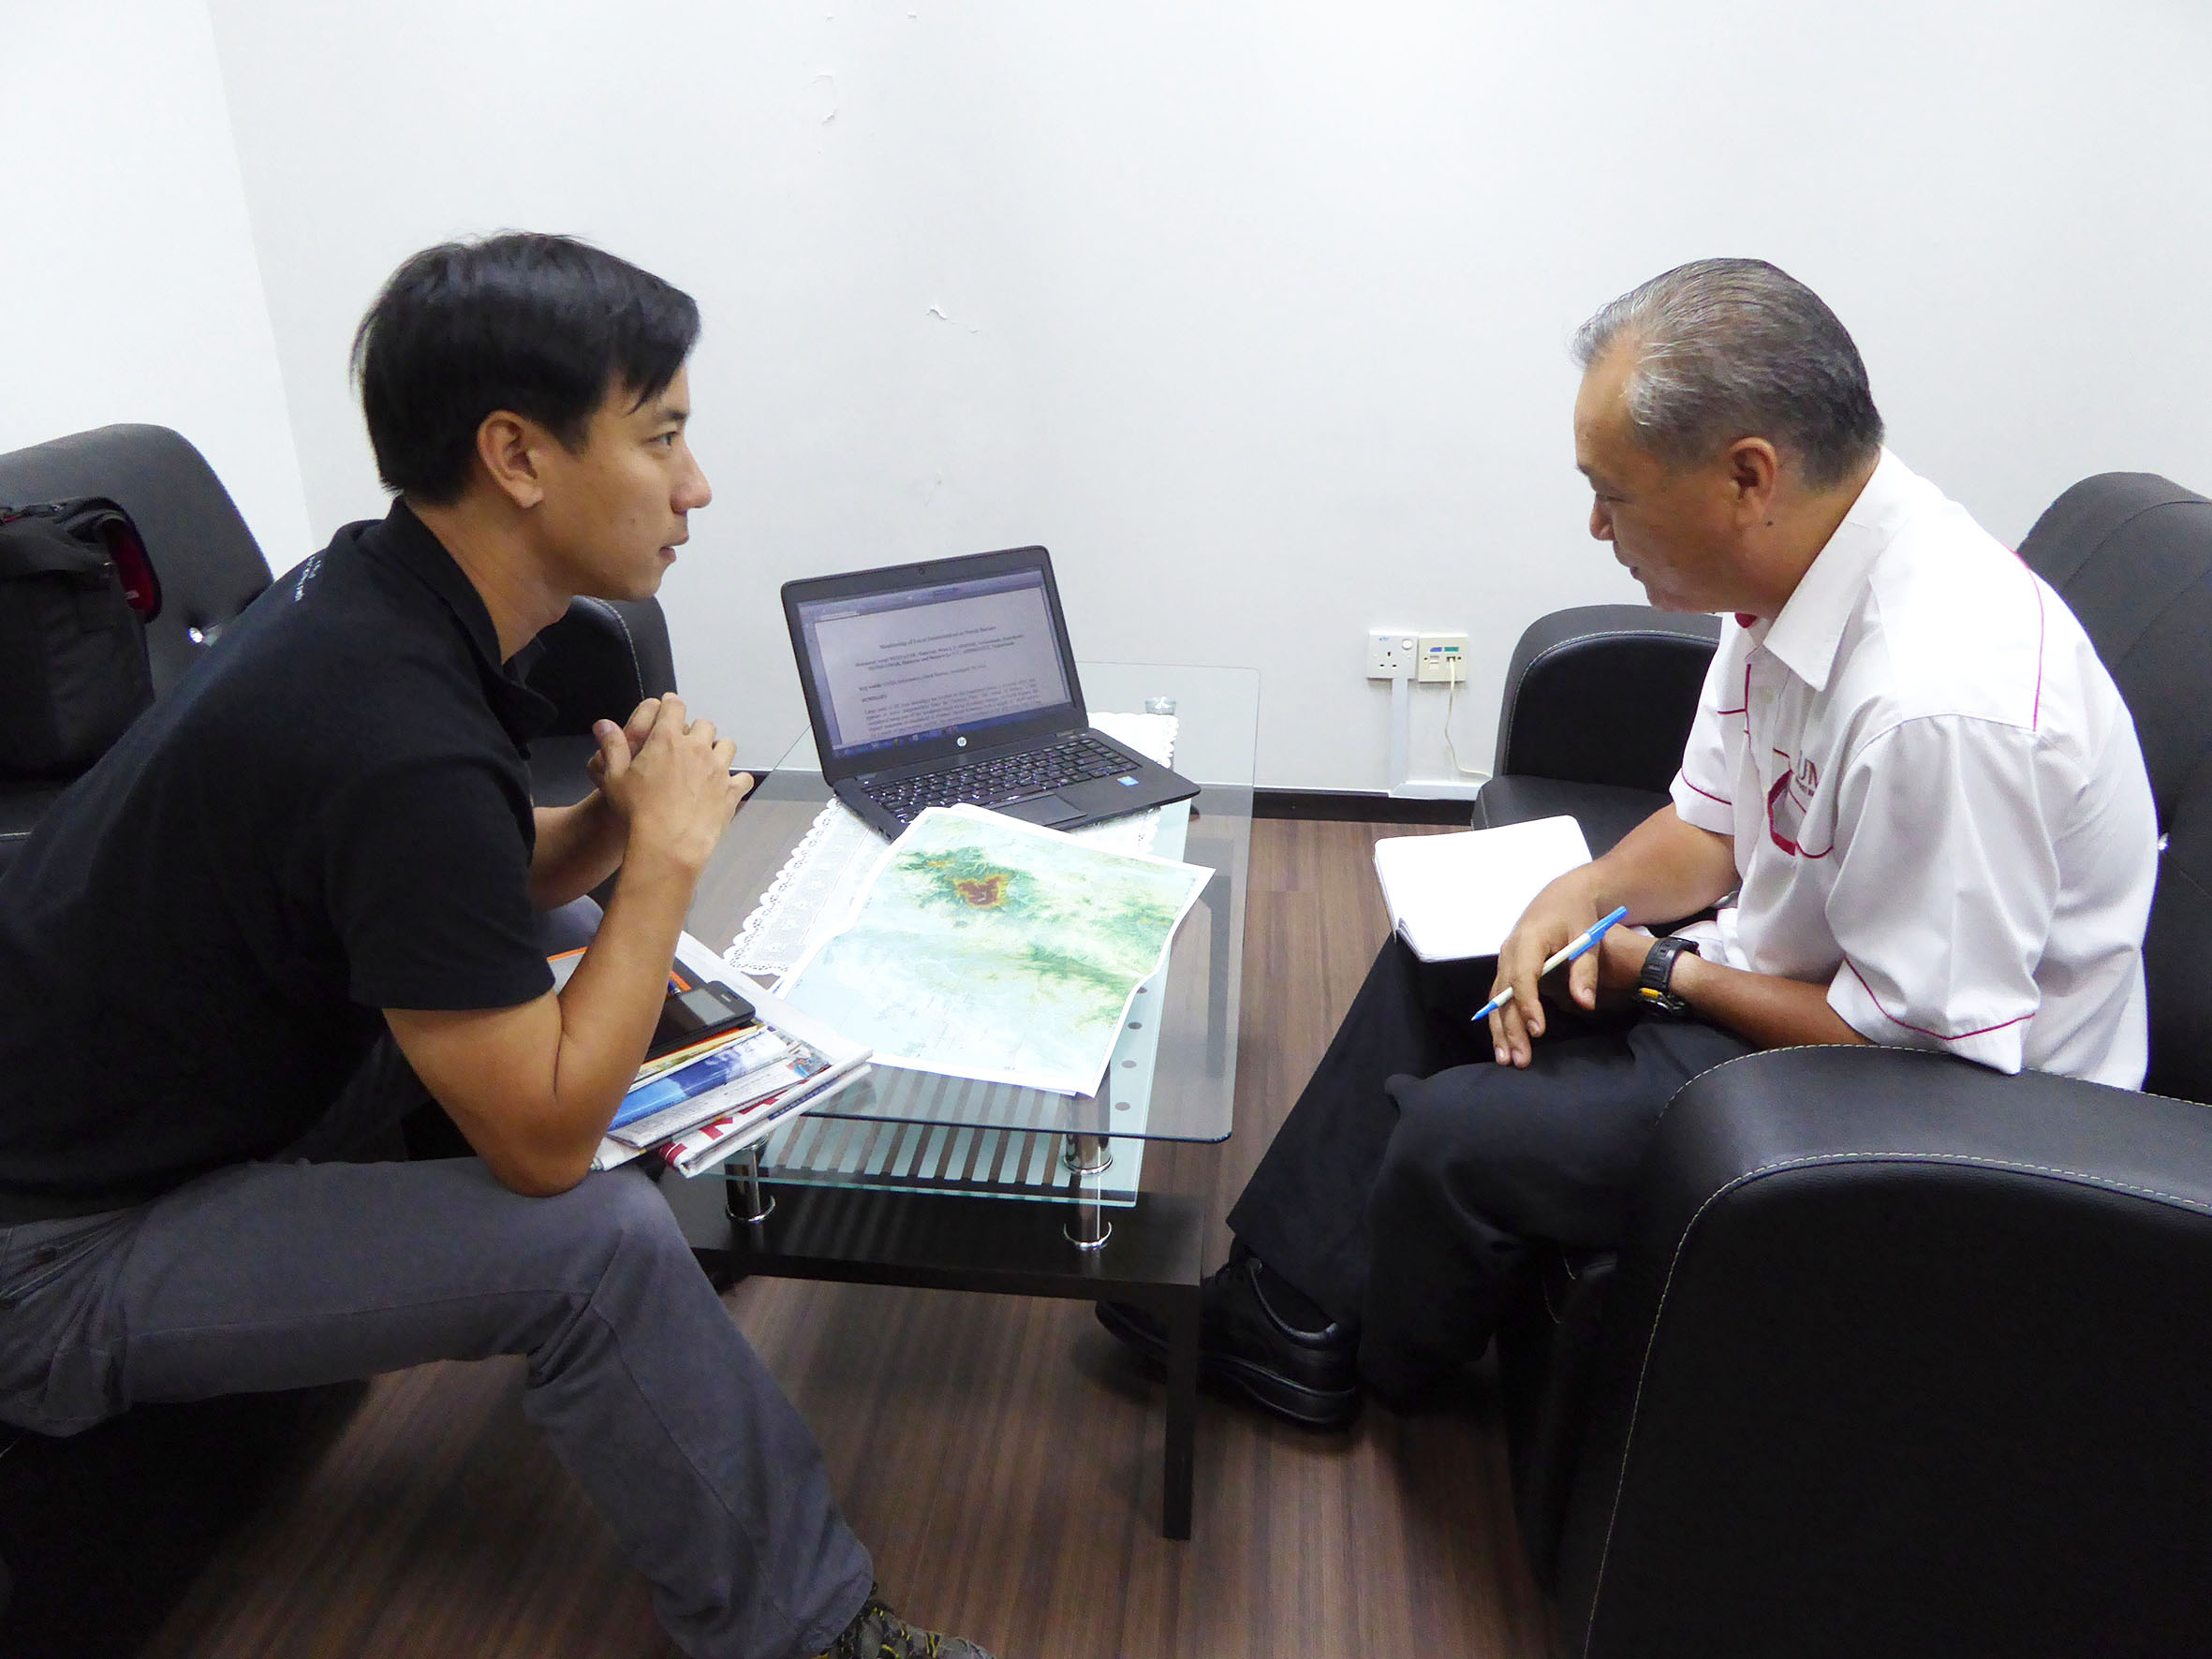 Dr Wang Yu (left) in a discussion with Prof Felix Tongkul, director of Universiti Malaysia Sabah (UMS) Centre for Research Management and Innovation (Source: Yvonne Soon)